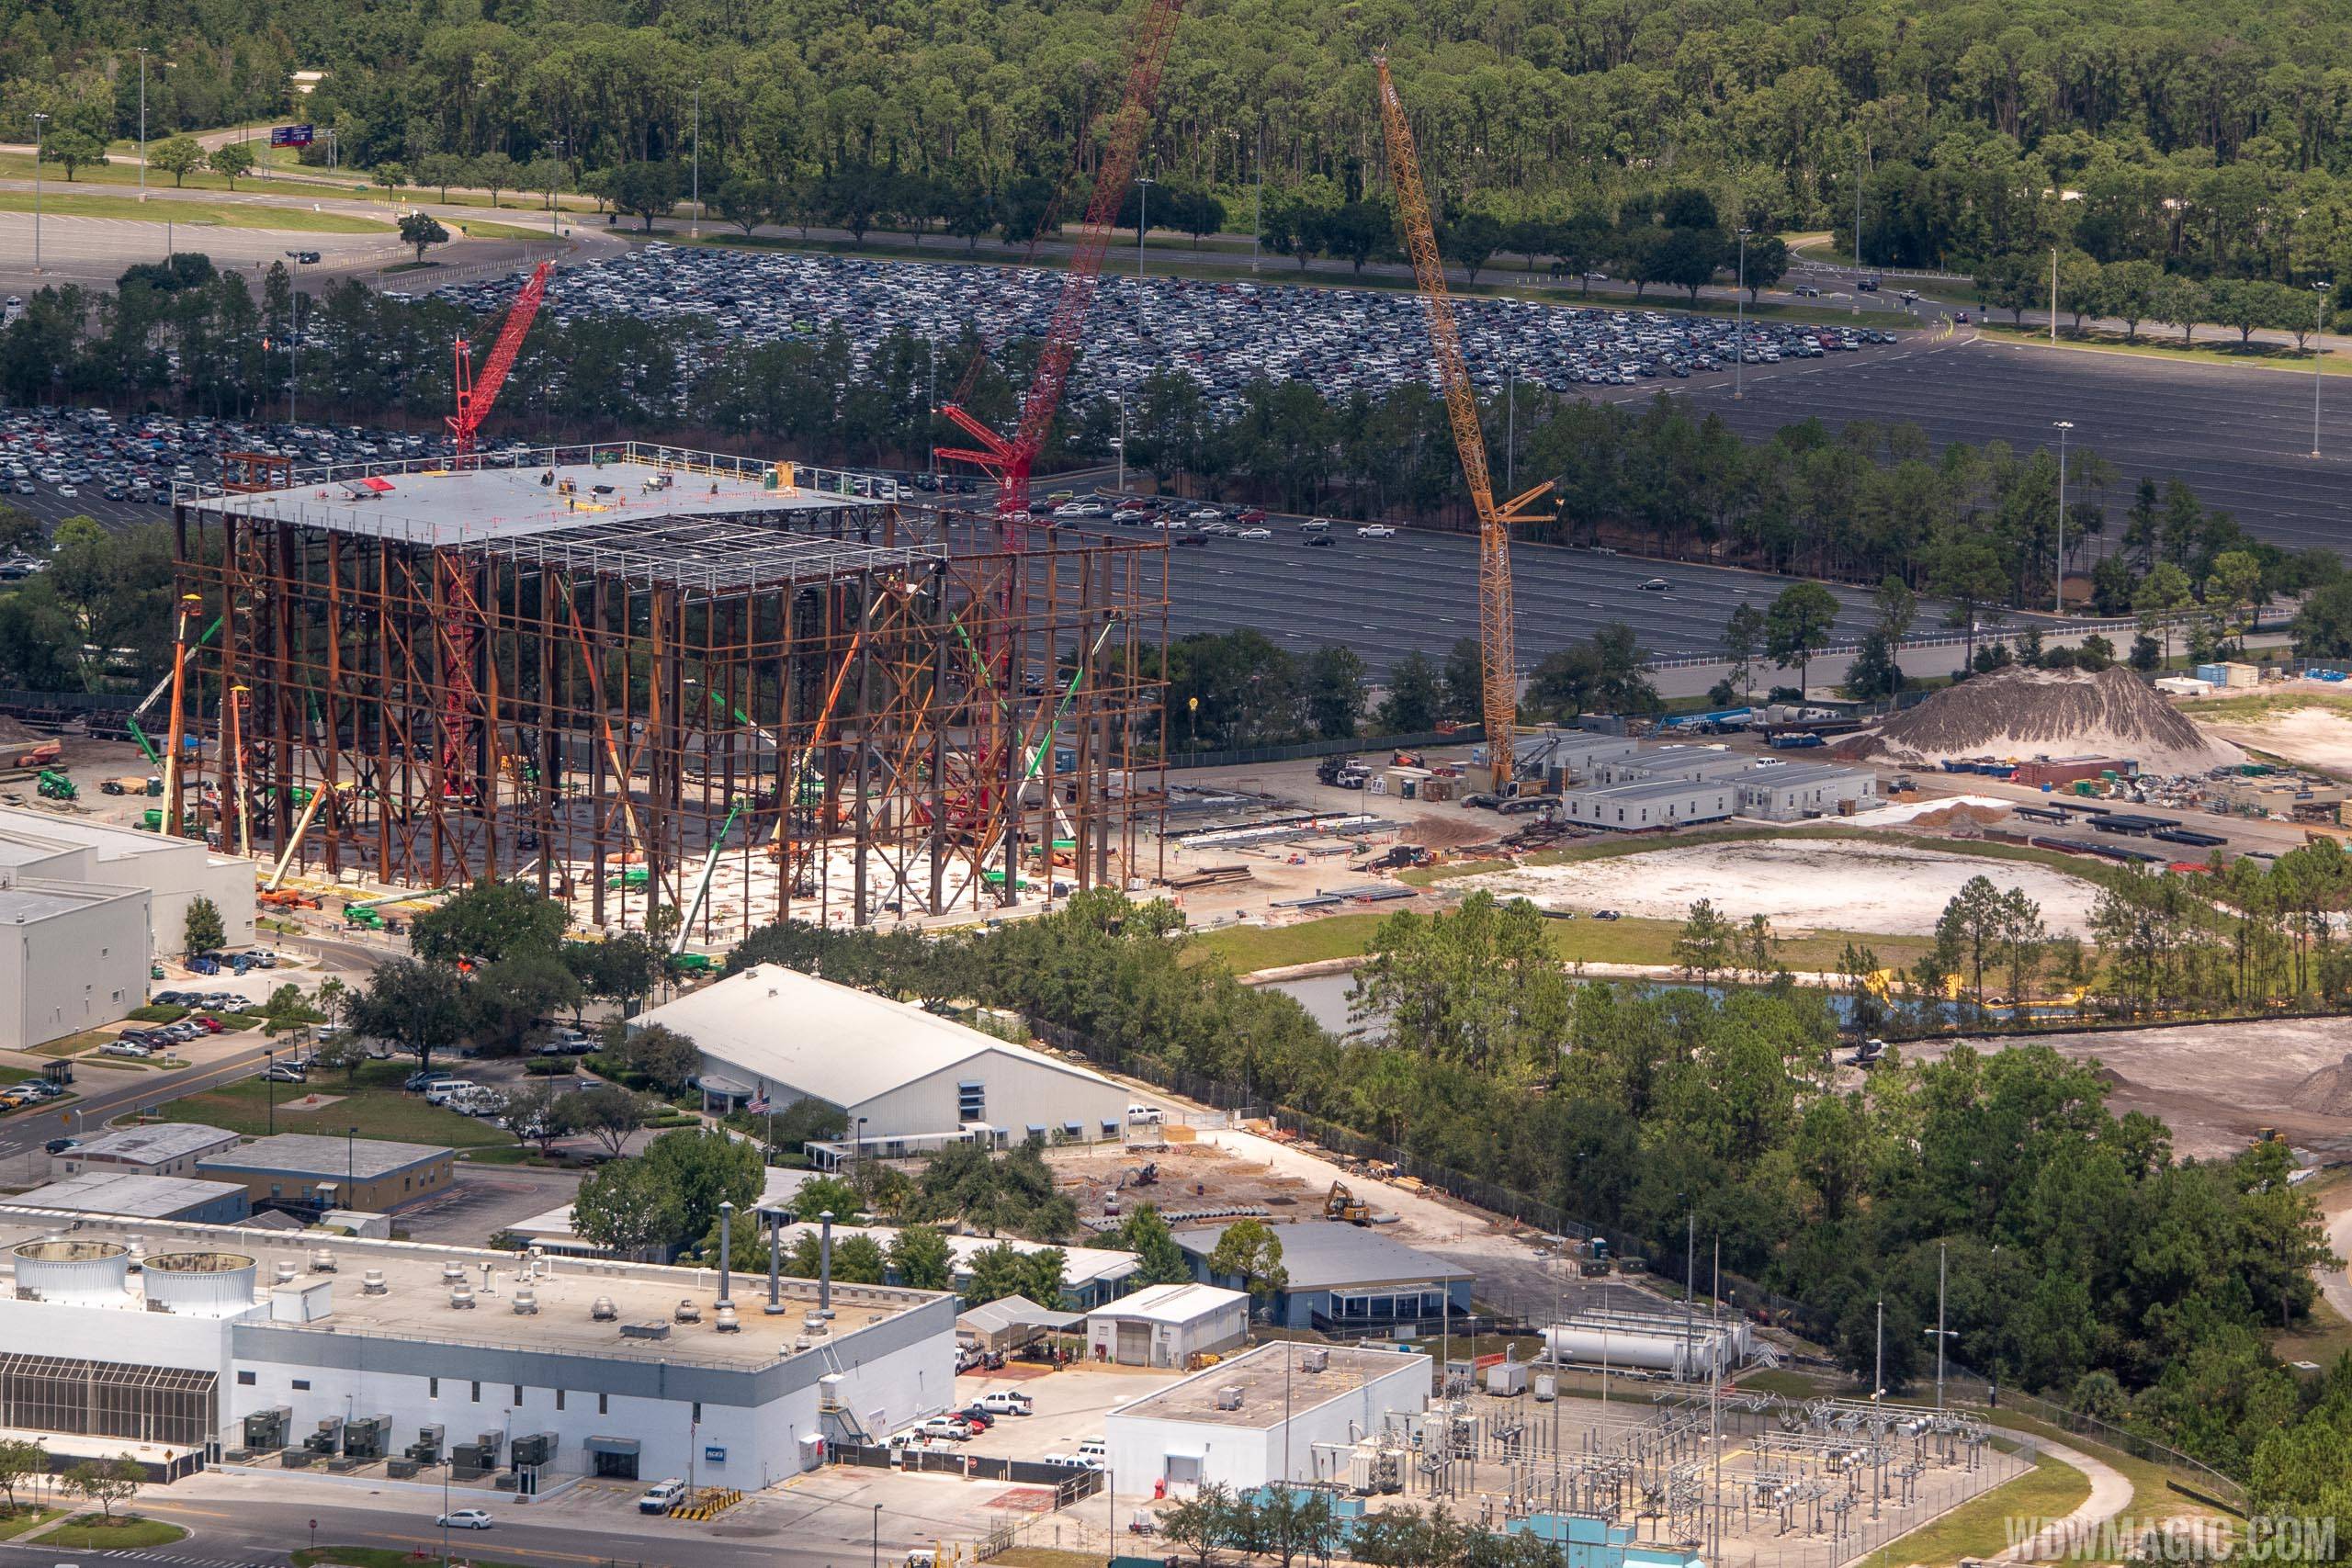 PHOTOS - Guardians of the Galaxy construction update from the air